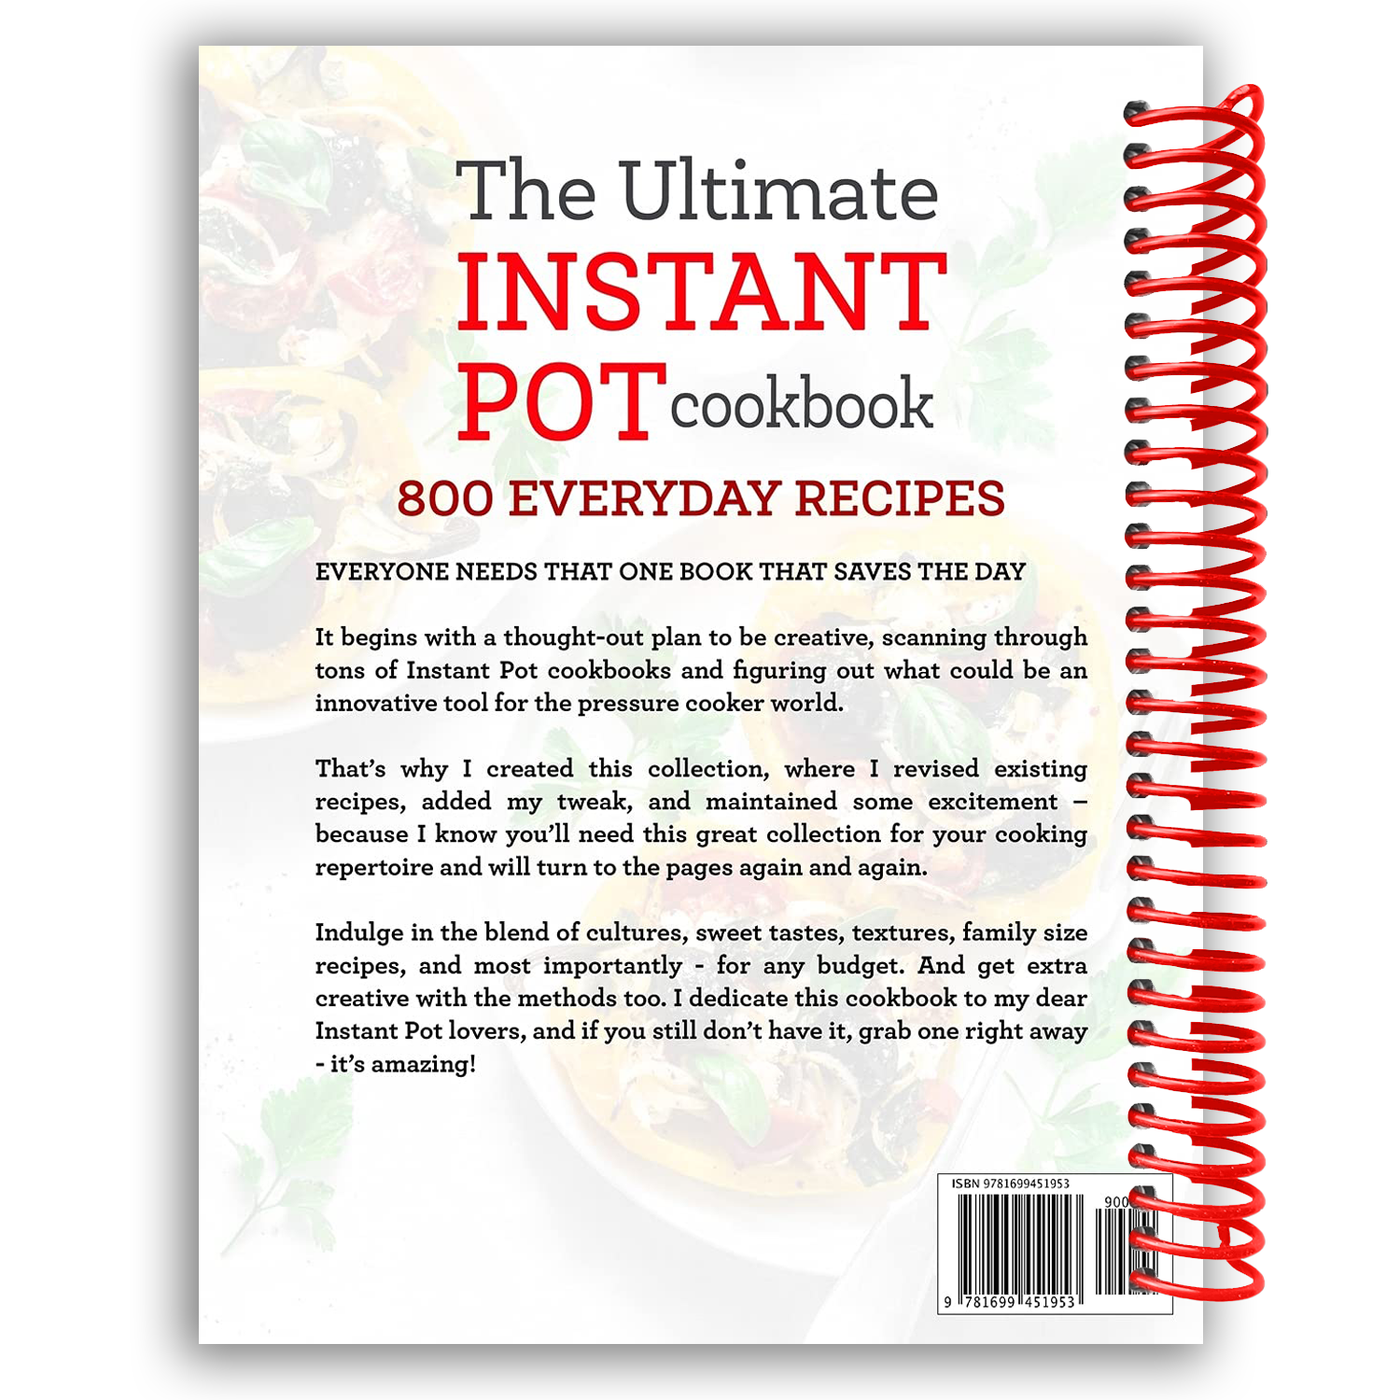 The Ultimate Instant Pot Cookbook: Foolproof, Quick & Easy 800 Instant Pot Recipes for Beginners and Advanced Users (Spiral Bound)